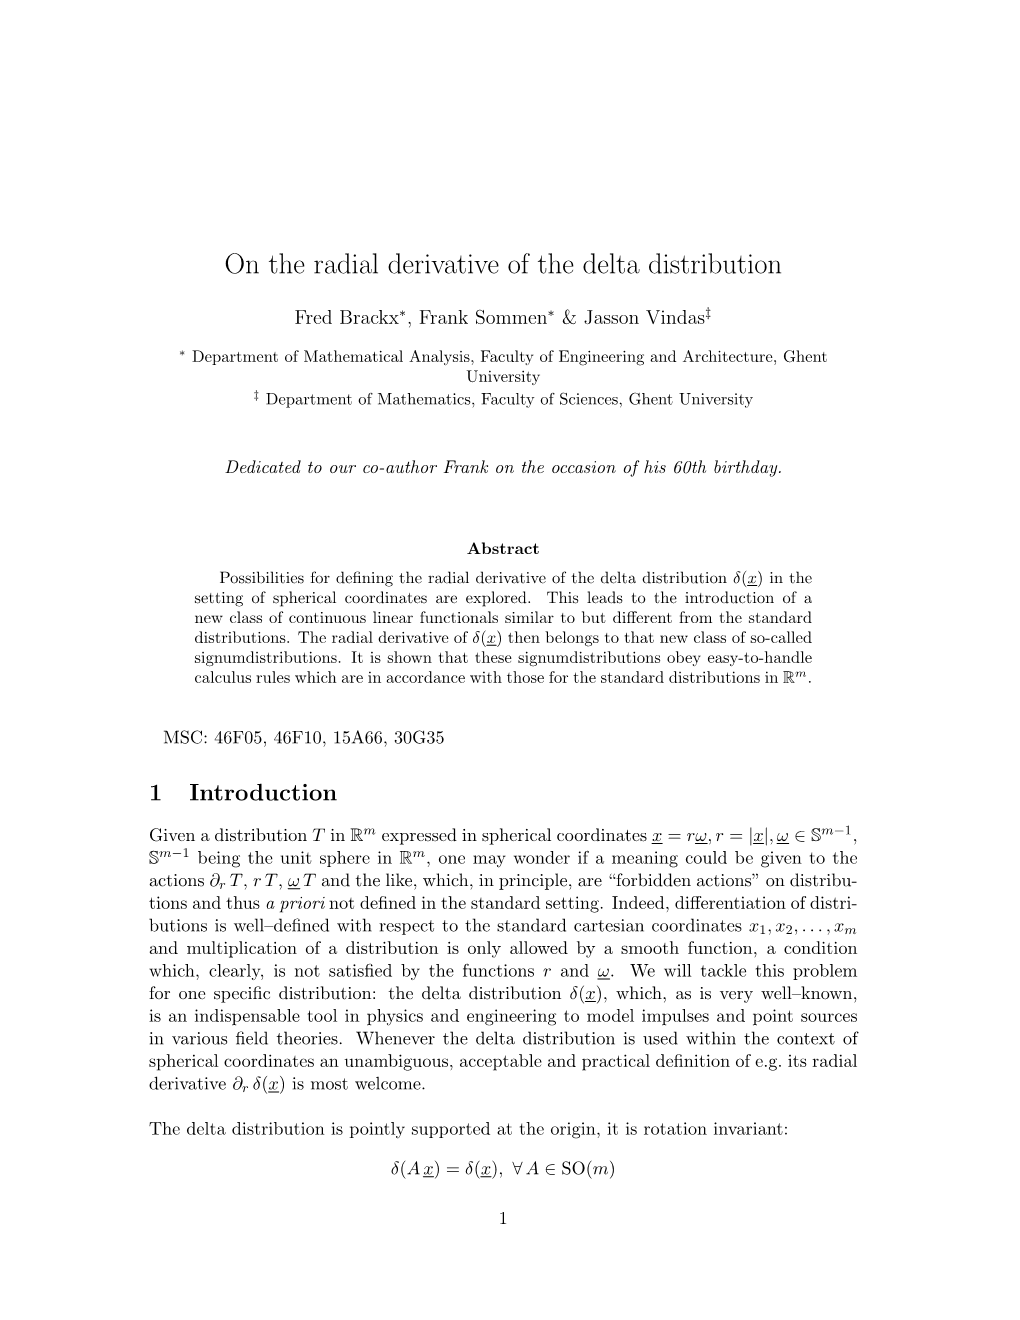 On the Radial Derivative of the Delta Distribution